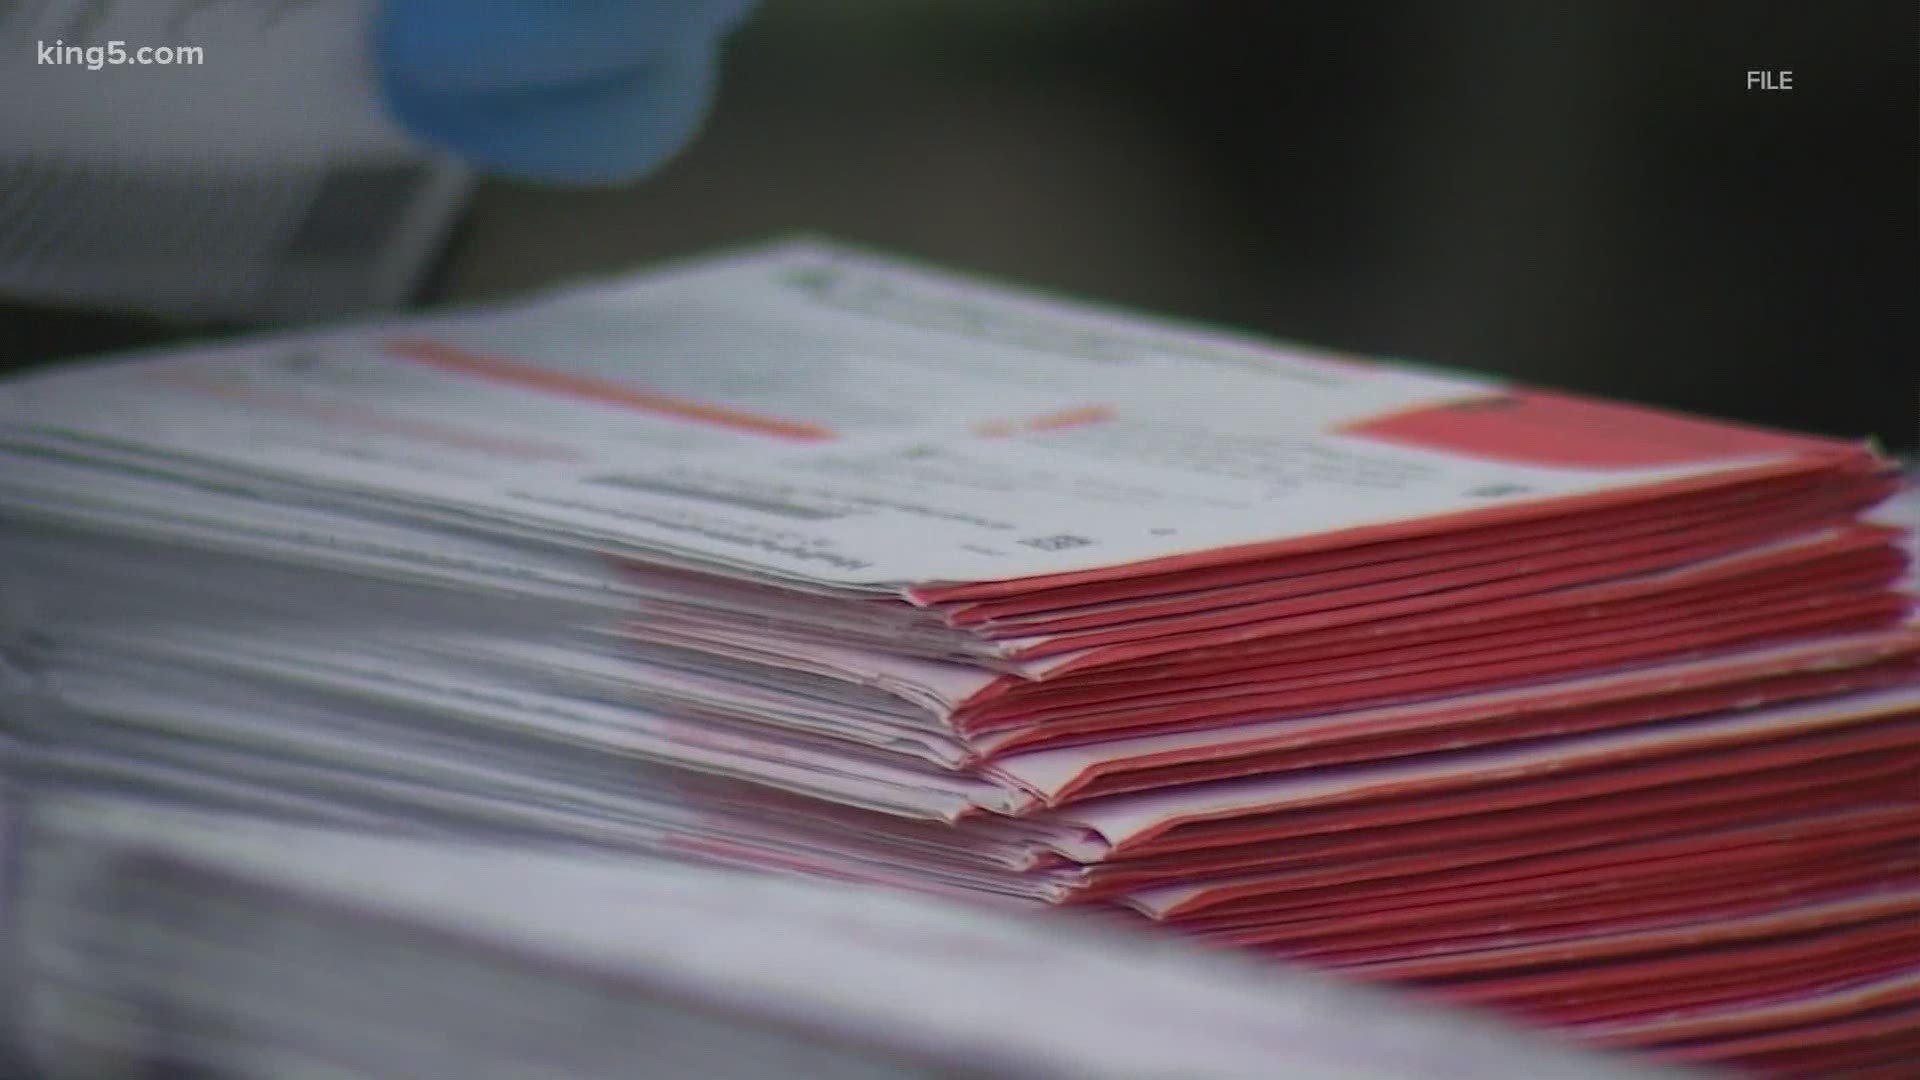 The Washington state primary is on Aug. 4. Ballots have been mailed to voters.